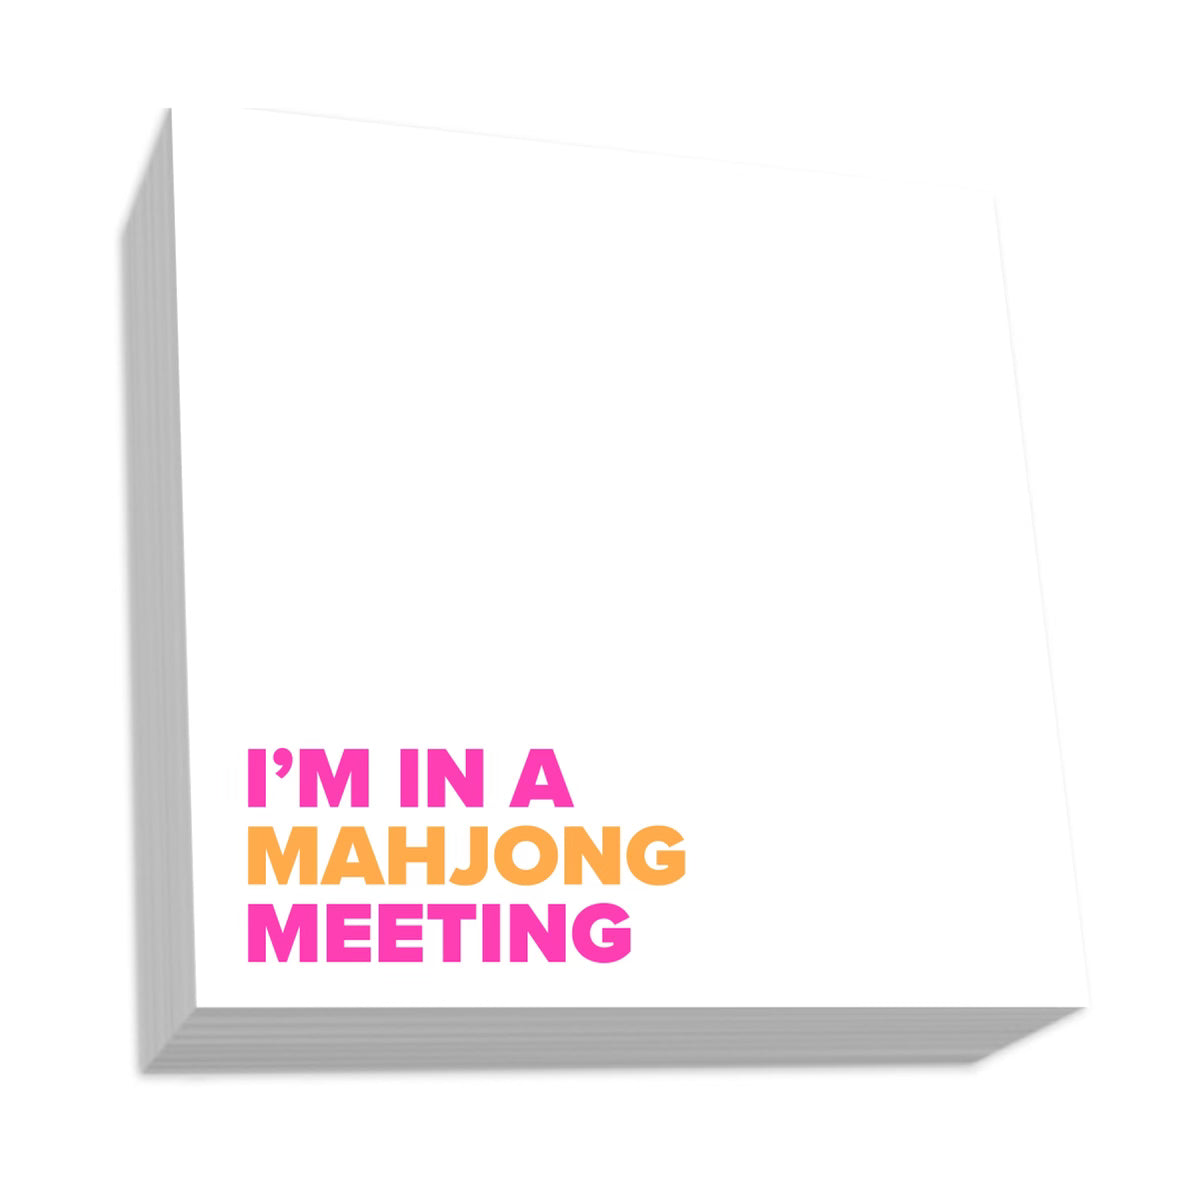 "I'M IN A MAHJONG MEETING NOTEPAD